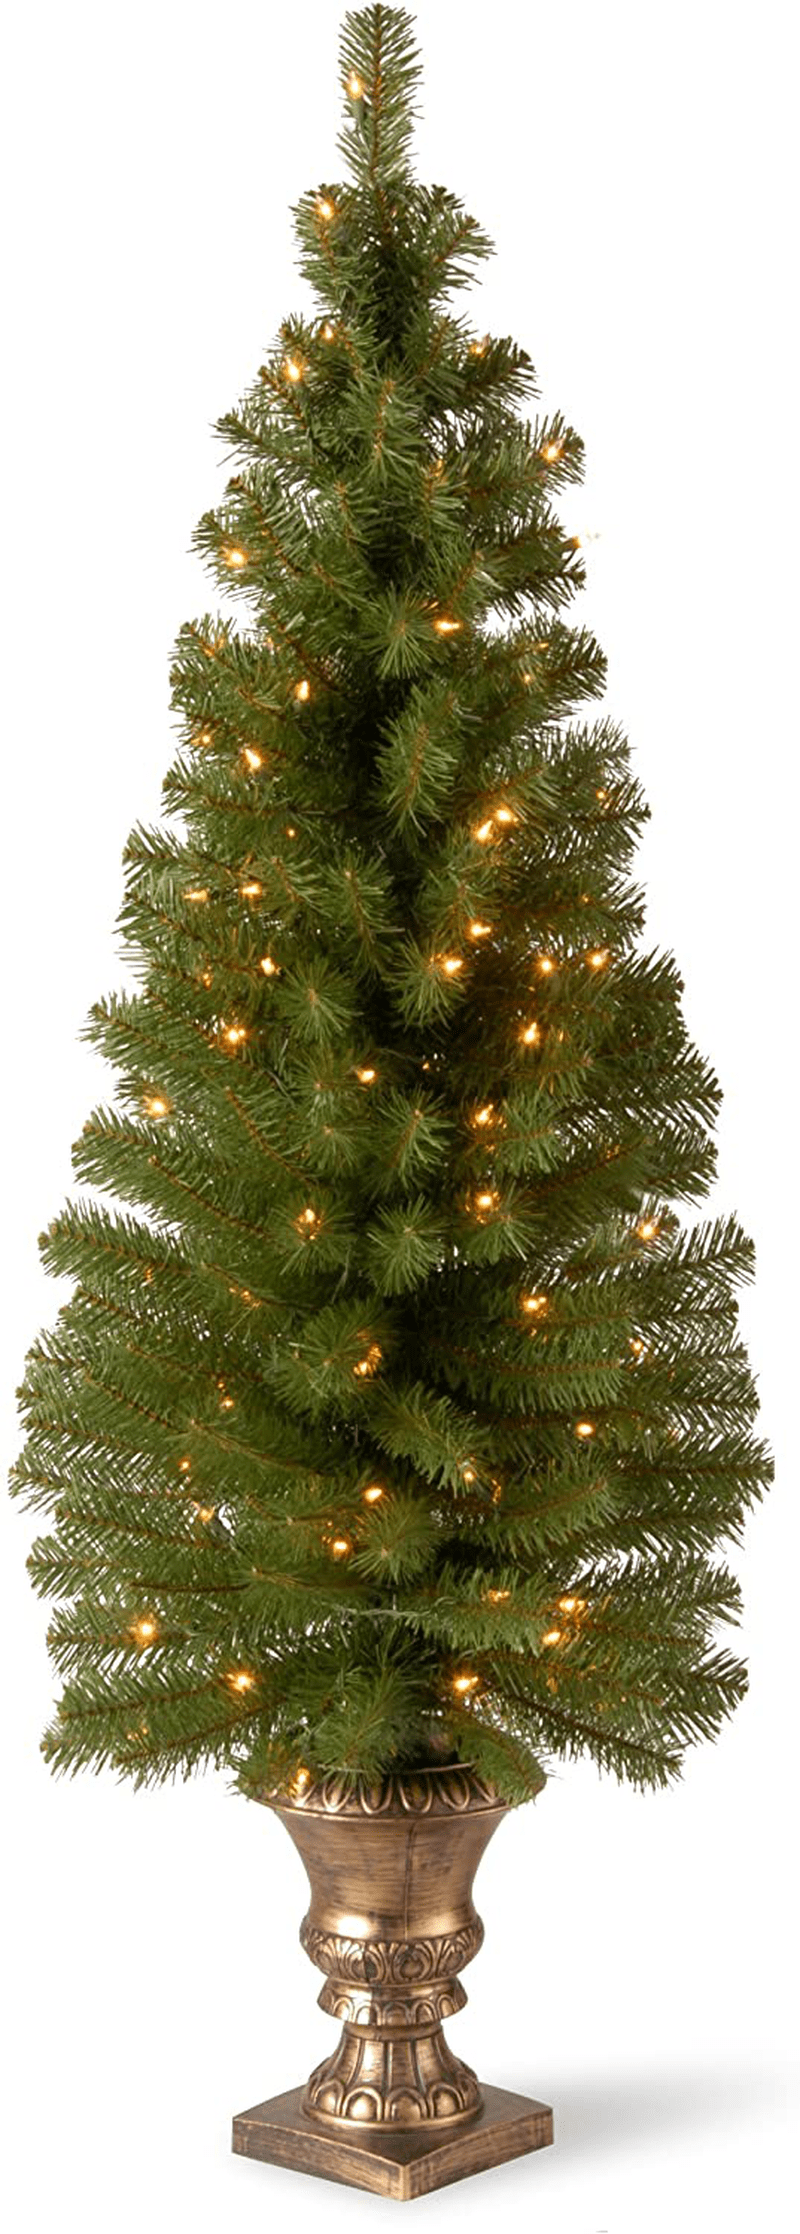 National Tree Company Pre-lit Artificial Christmas Tree For Entrances | Includes Pre-strung White Lights and Stand | Montclair Spruce - 5 ft Home & Garden > Decor > Seasonal & Holiday Decorations > Christmas Tree Stands National Tree Company Tree 5 ft 